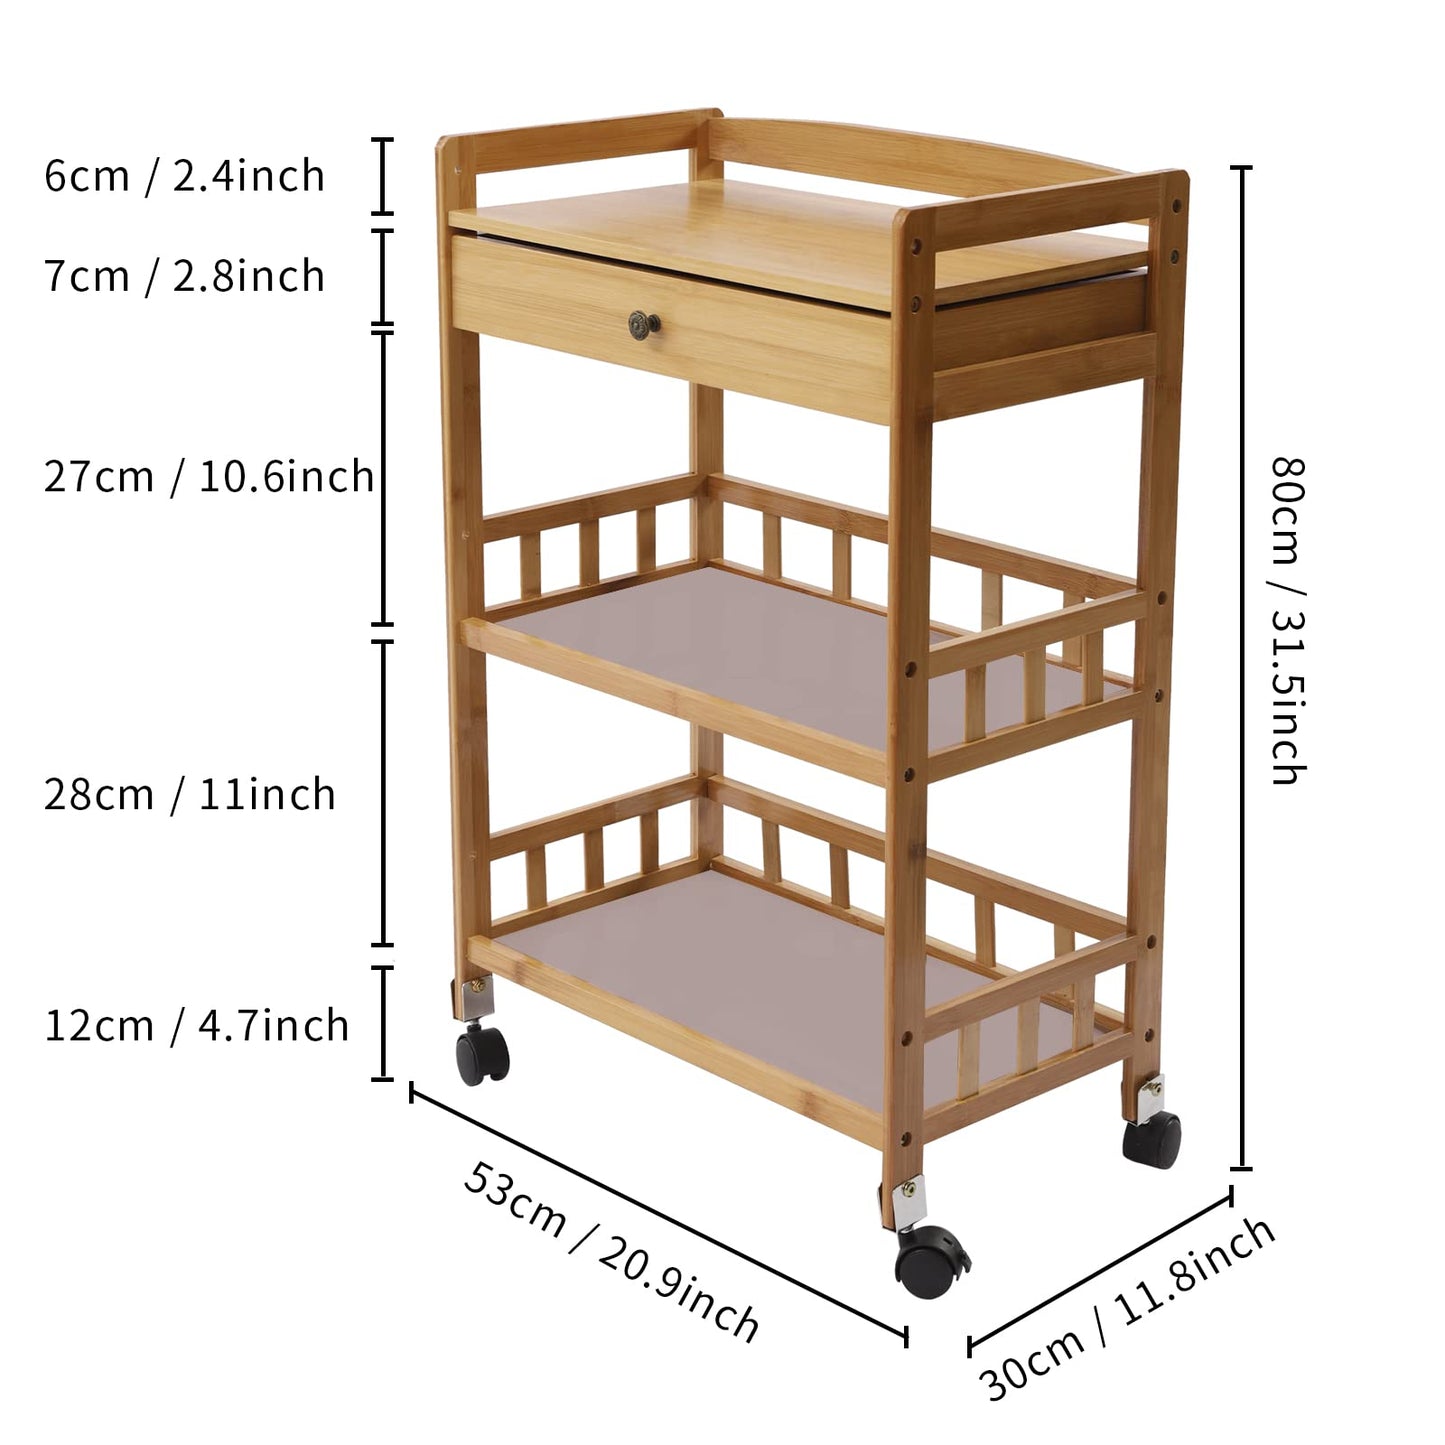 3-Tier Serving Cart with Drawer, Bamboo Kitchen Storage Rack, Bar Cart Dining Car Rolling Utility Cart for Restaurant, Home, Beauty Salon